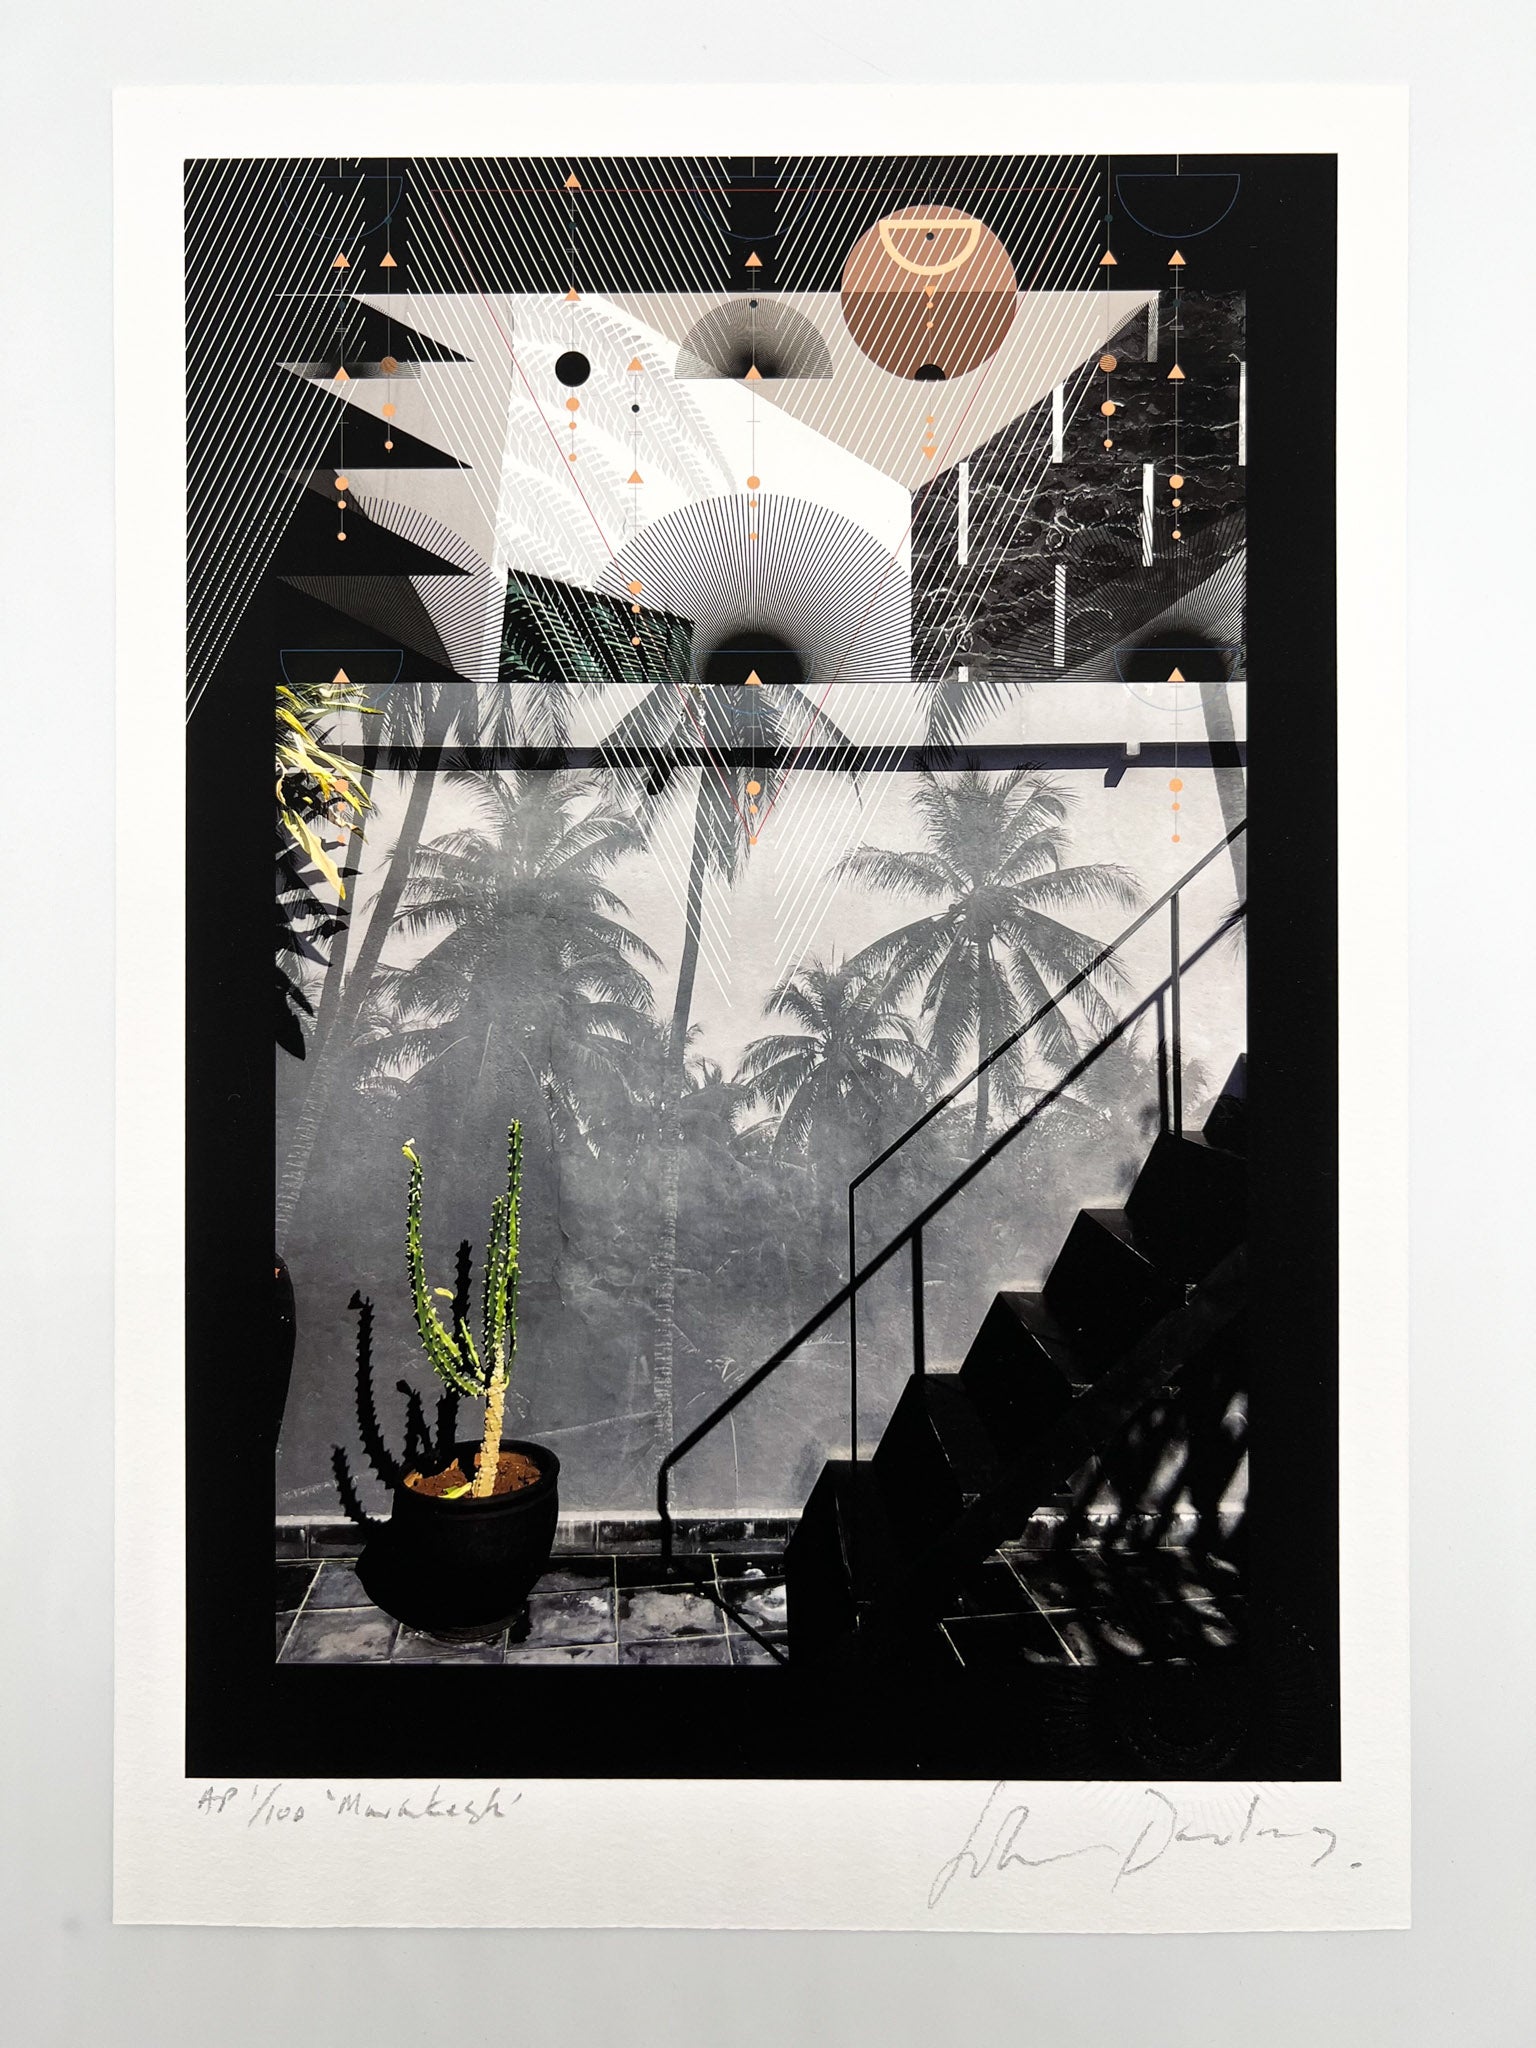 A giclee print with stairs, cactus, palm trees and overlaid geometric shapes in black white and pink